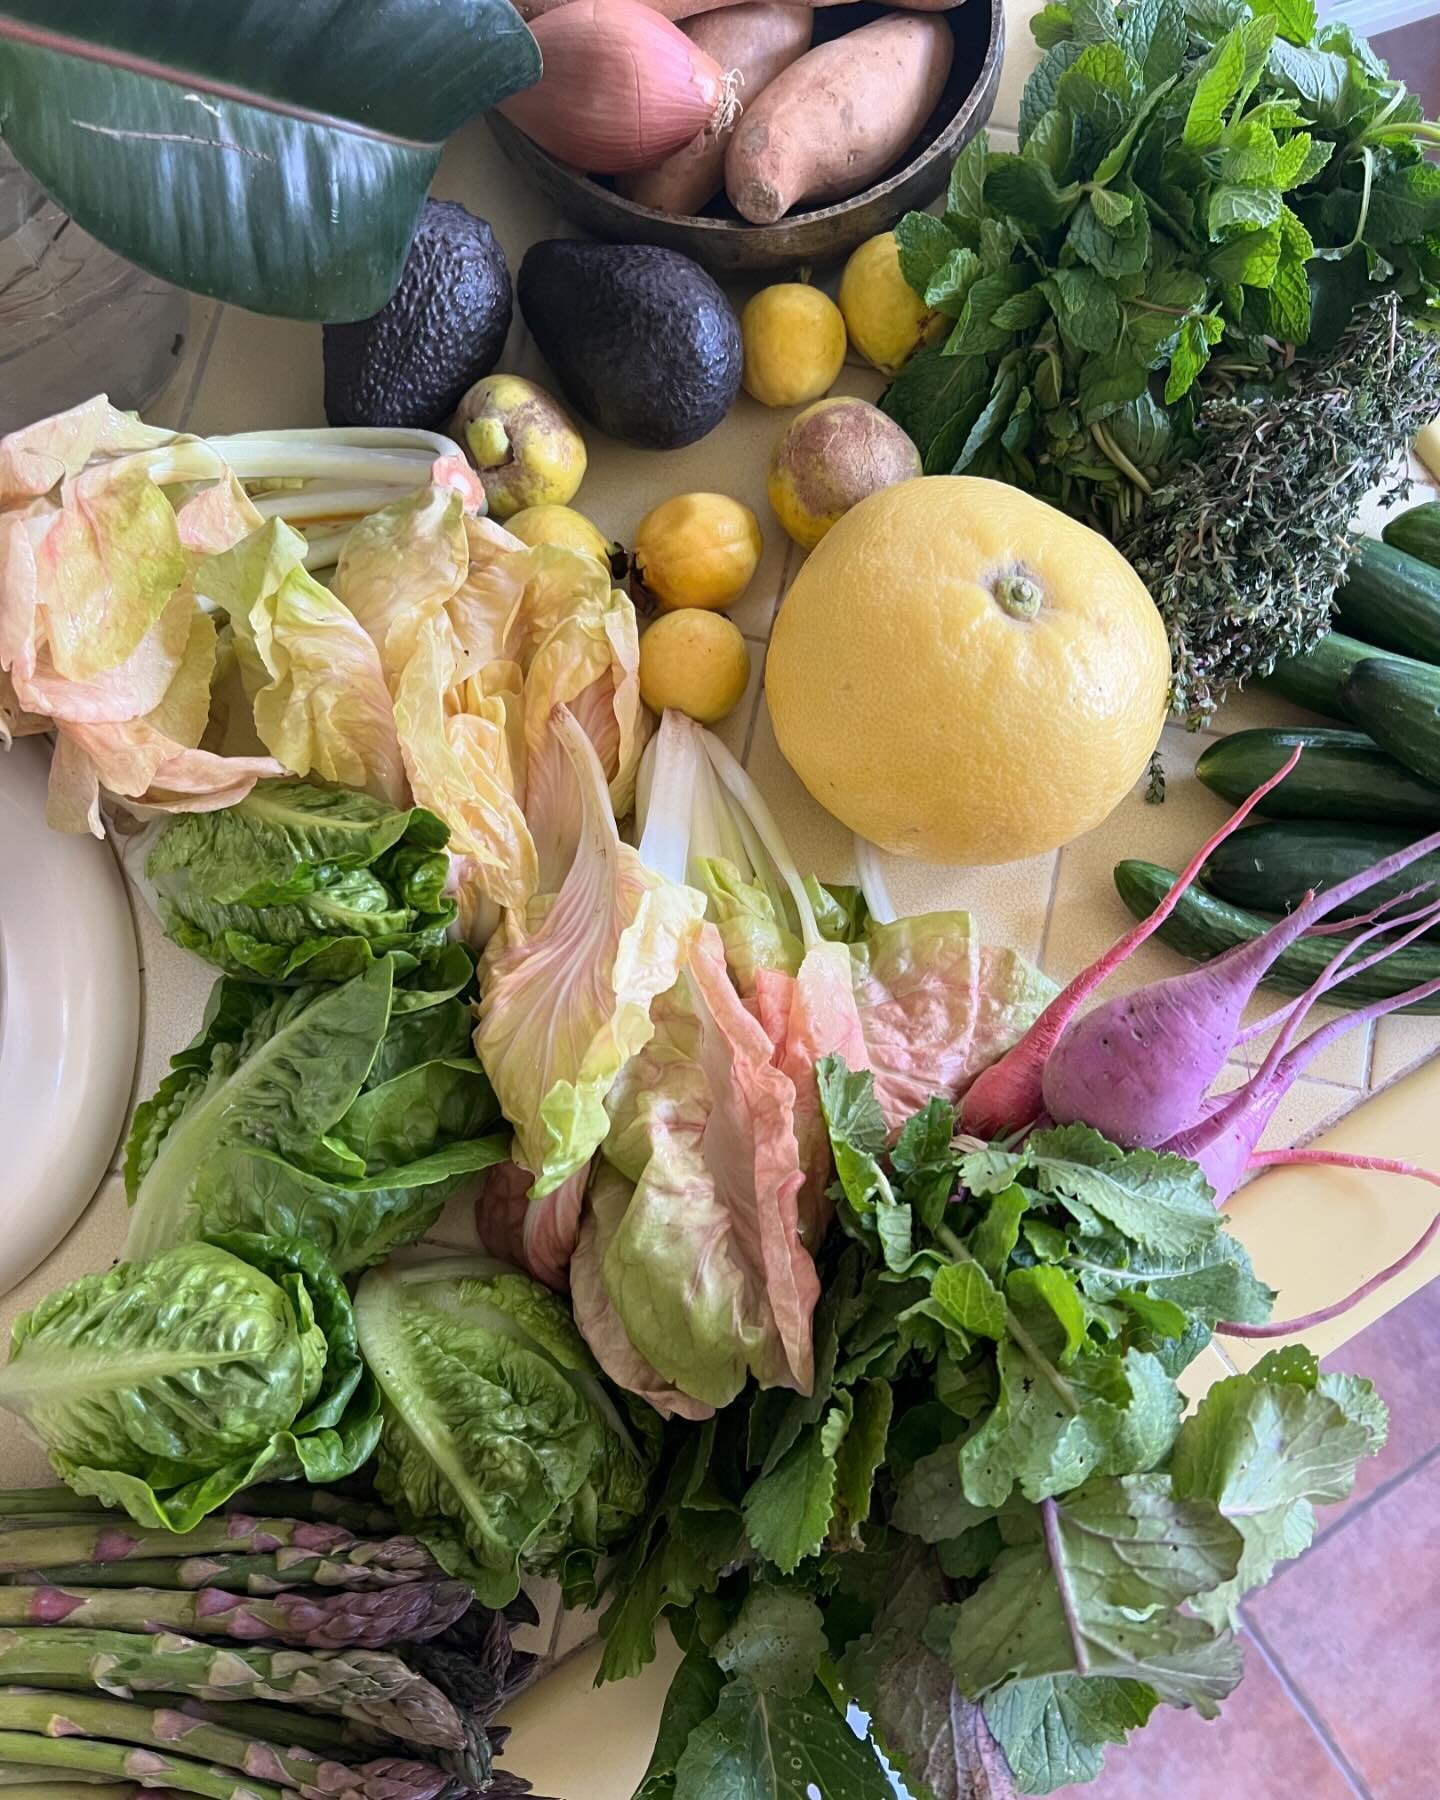 The ecstasy of seasonal produce, spelt and tantric practice 🌱🌸🐣 Delighted to share this special moment in time between me &amp; @raspberry_oil 💛 We connected on IG last summer bonding over our shared love for Hildegard of Bingen, a 12th century m